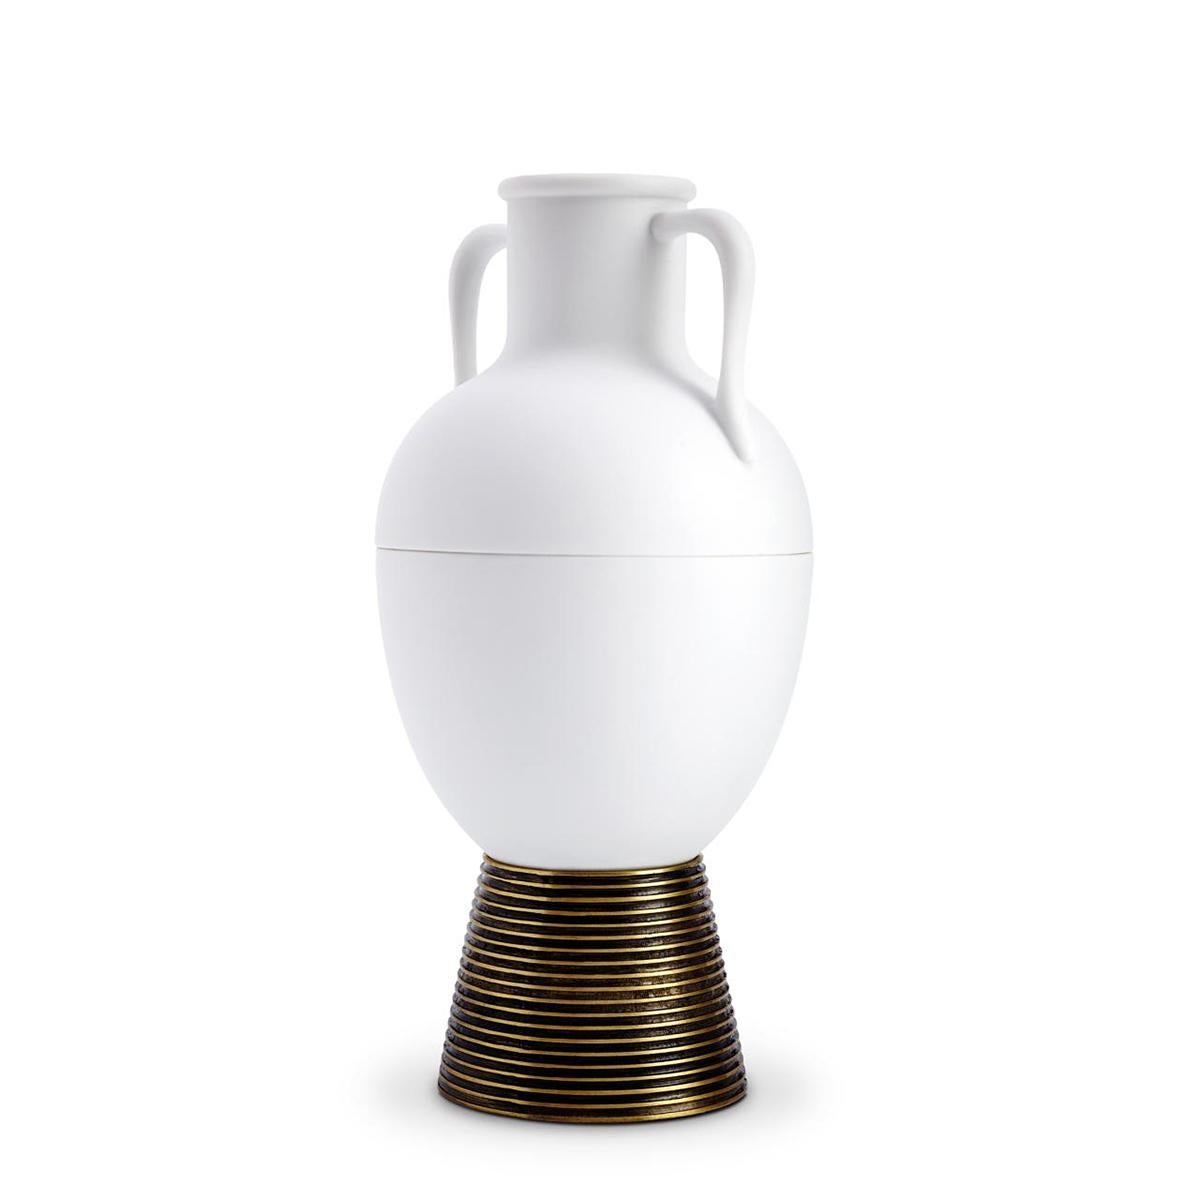 Vase Incense all in white porcelain and 
with solid brass base. With lid and inside
made to place incense sticks. Incense sticks
not included.